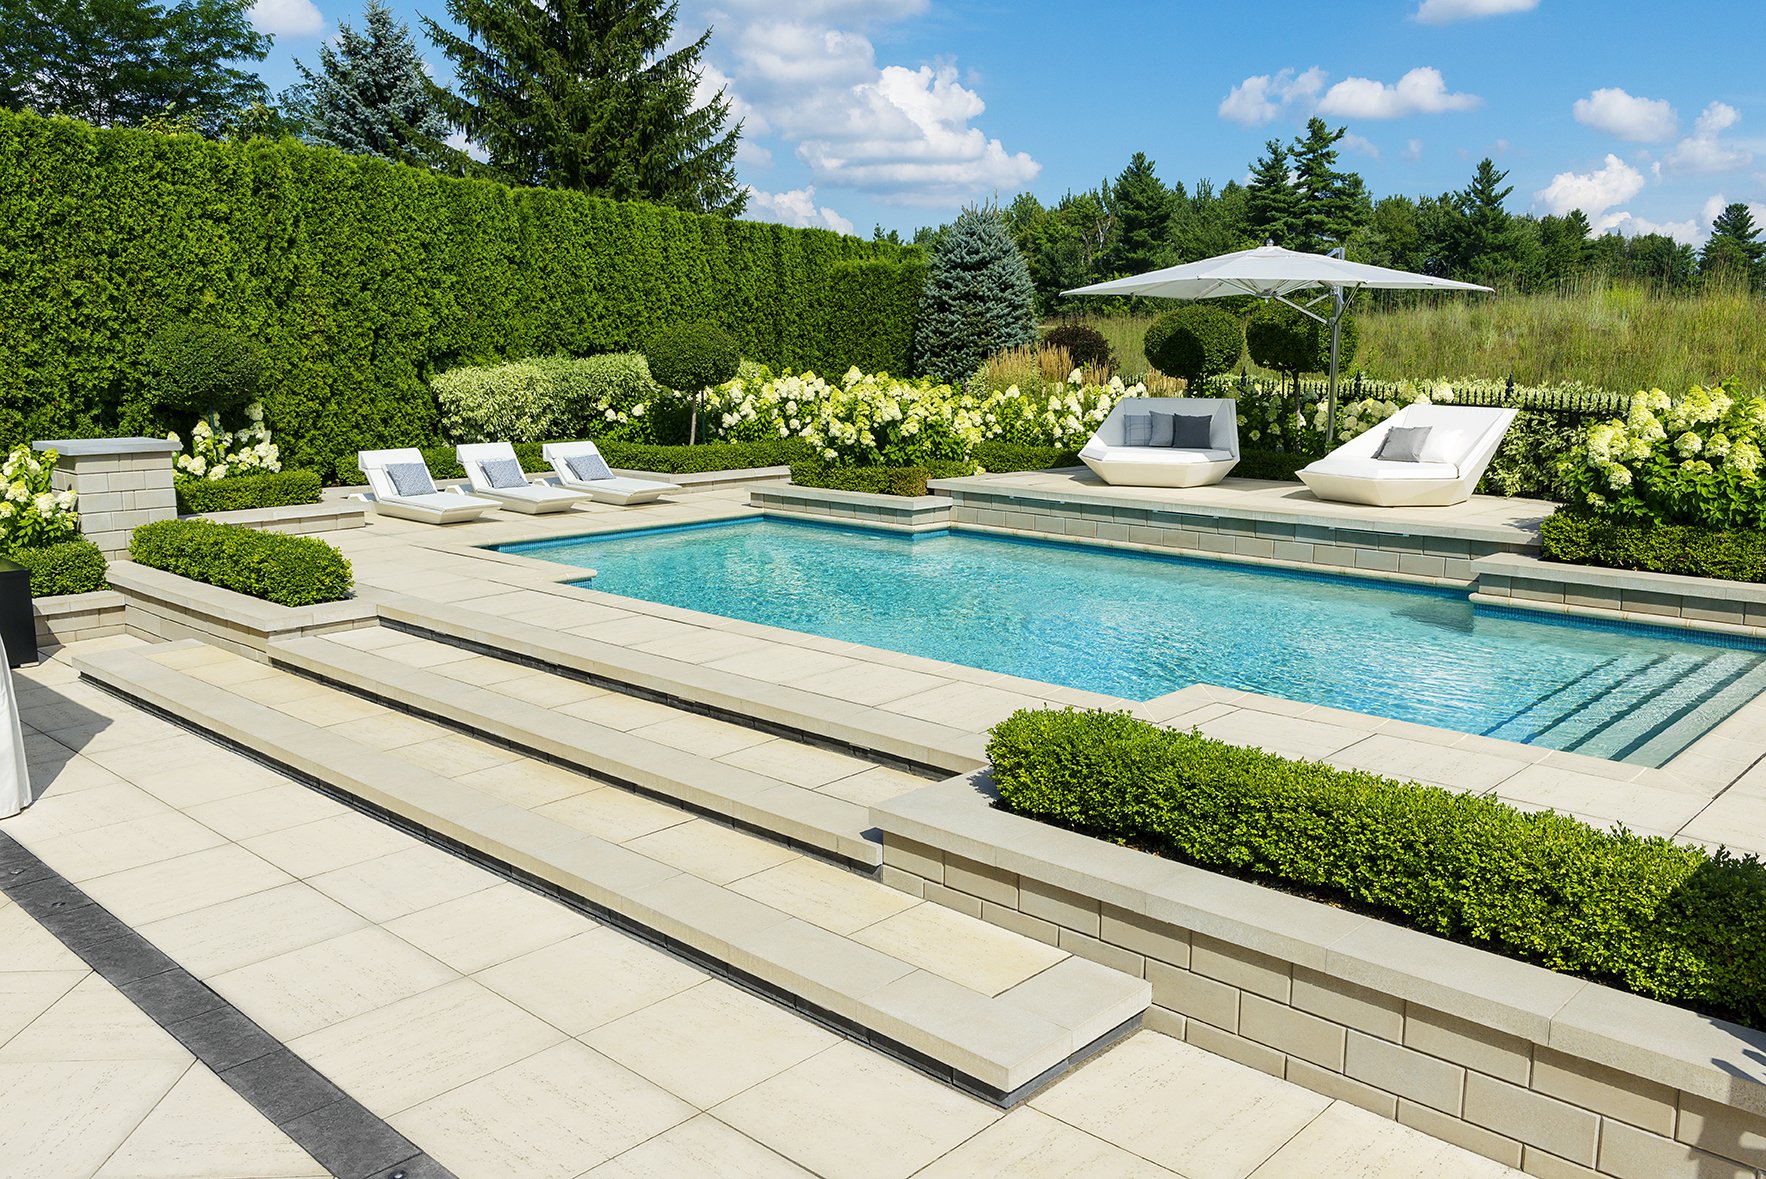 The Top 6 Swimming Pool Trends that are shaping the industry!